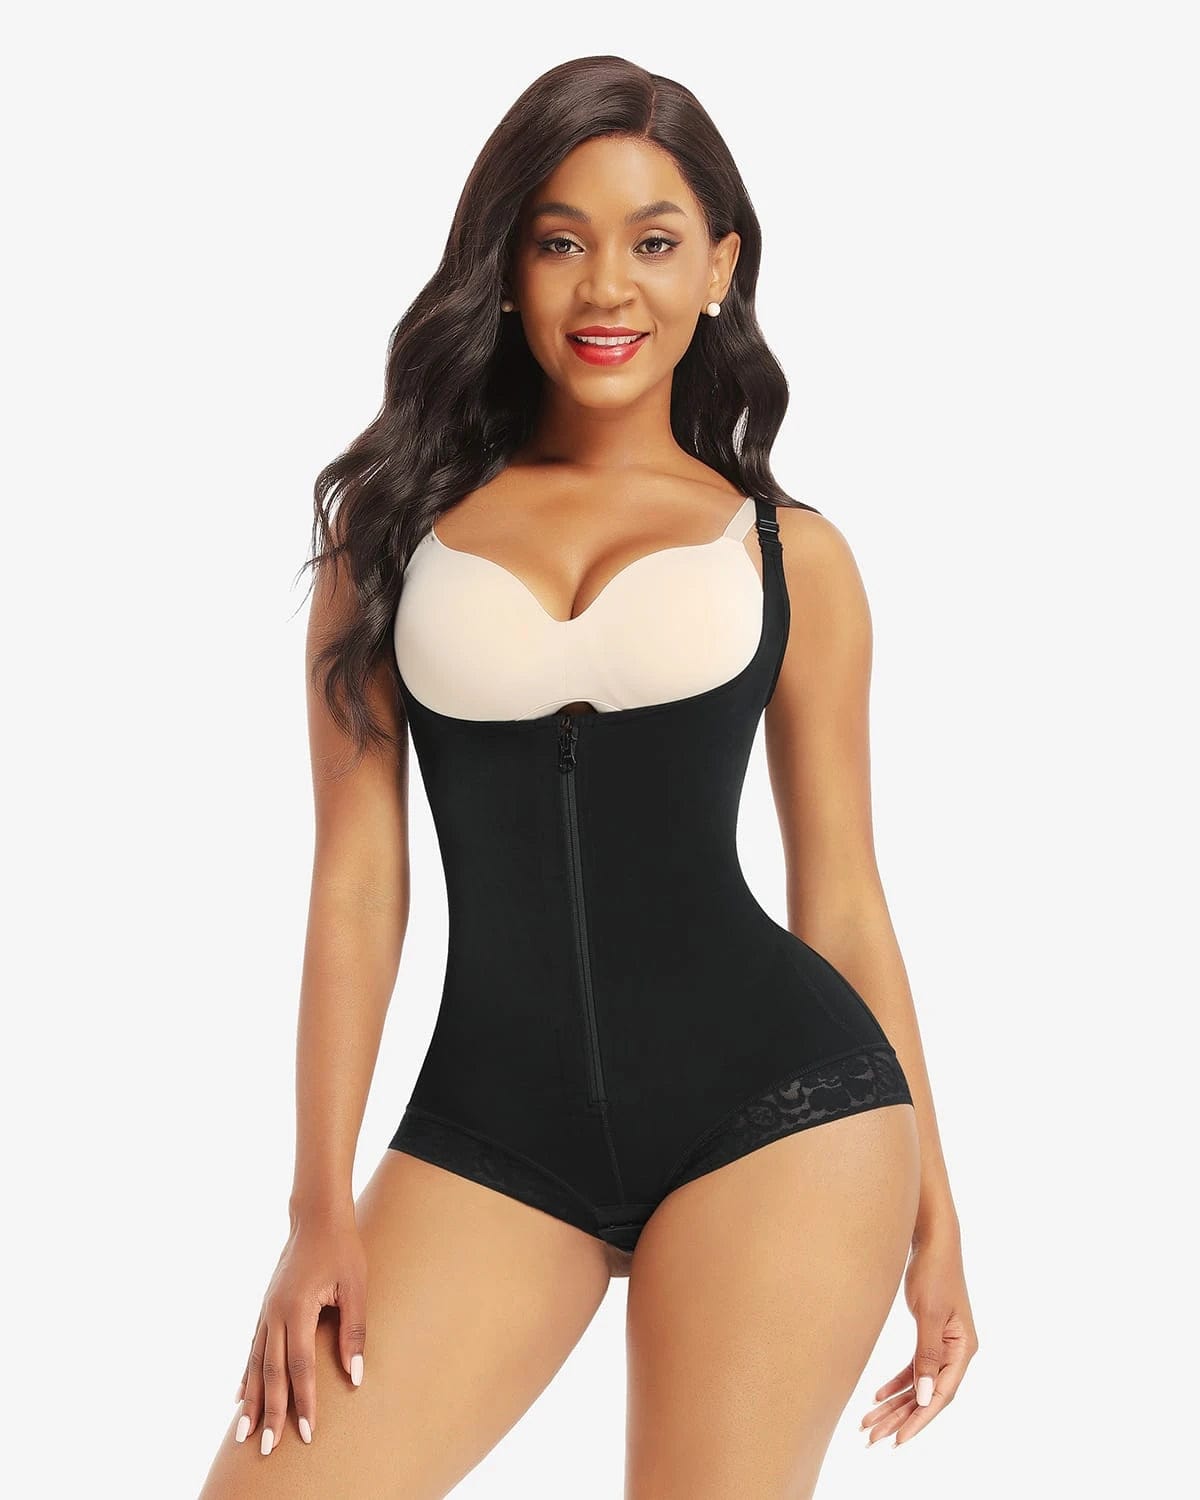 Shappelx PowerConceal Body Shaper try-on. Snug & snatched - best way t